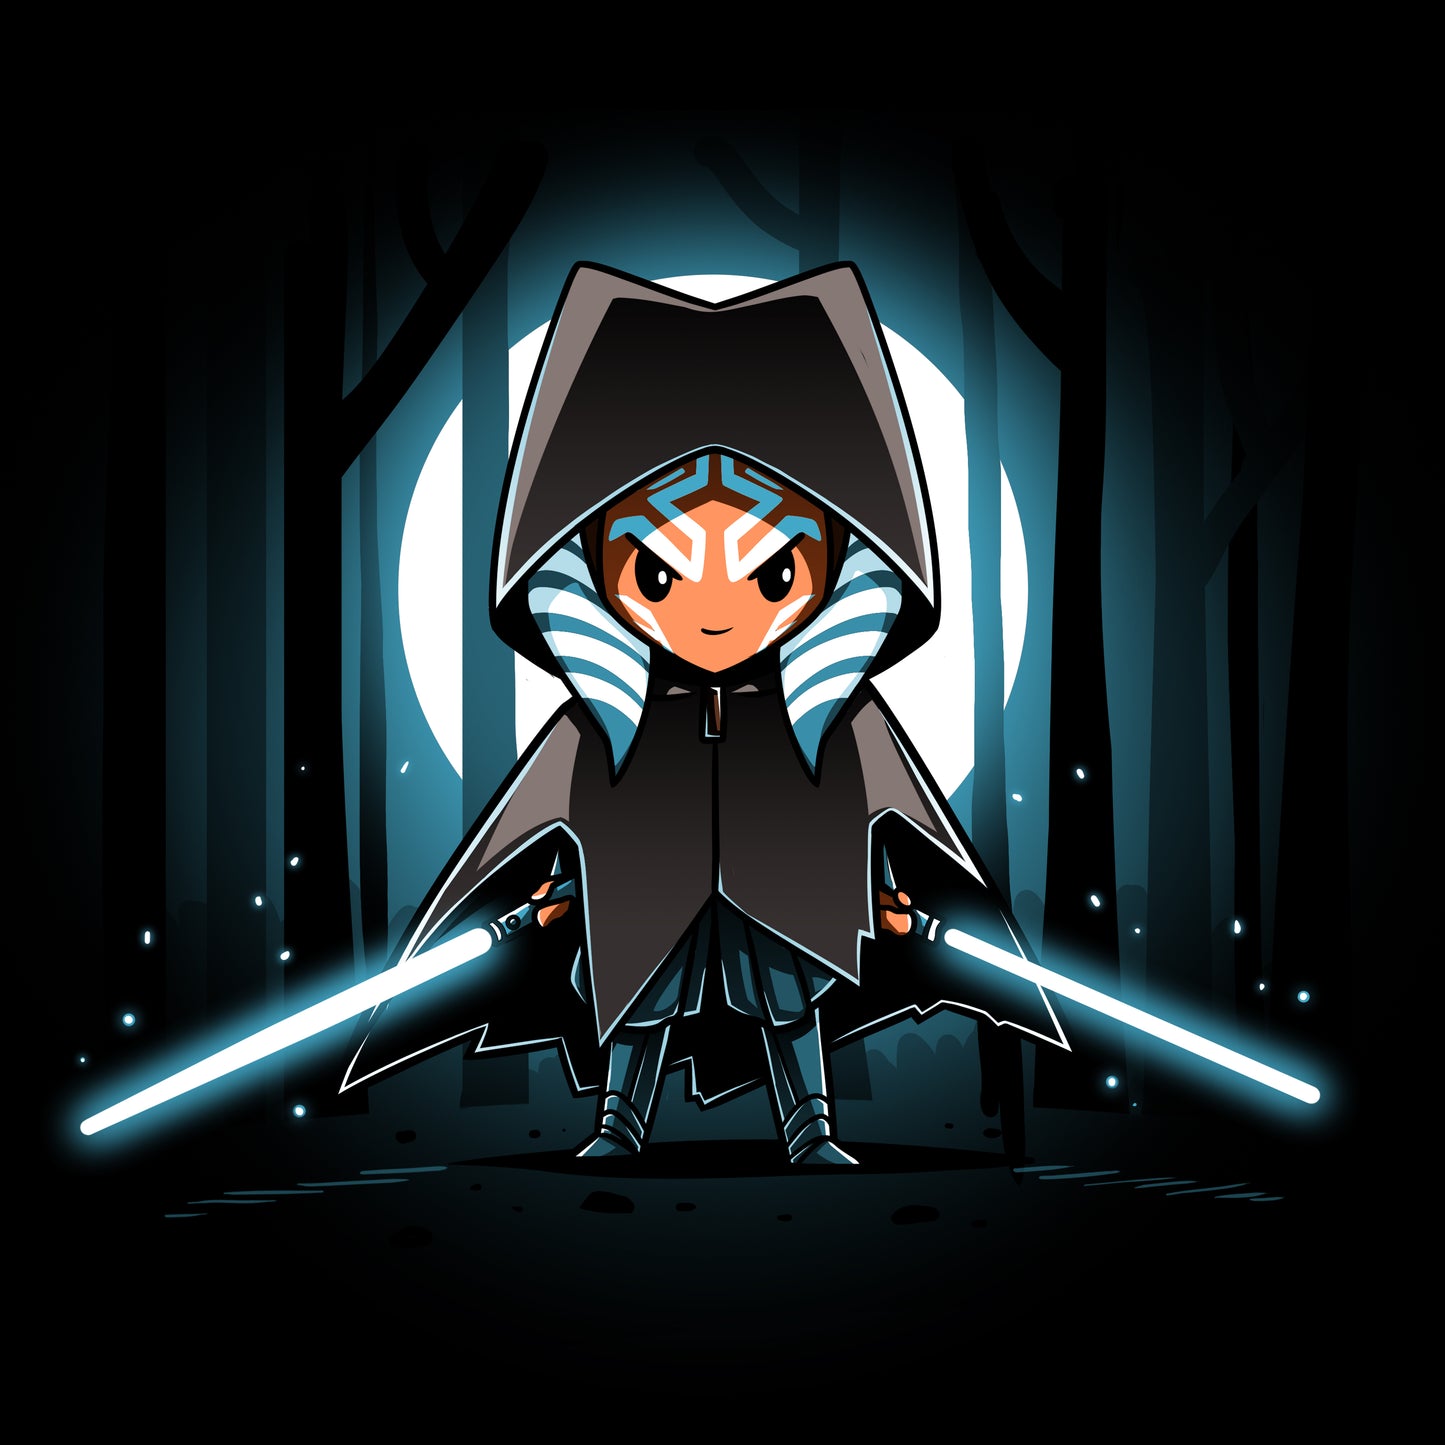 Officially licensed Cloaked Ahsoka Tano character wielding lightsabers in the woods.
(Star Wars)